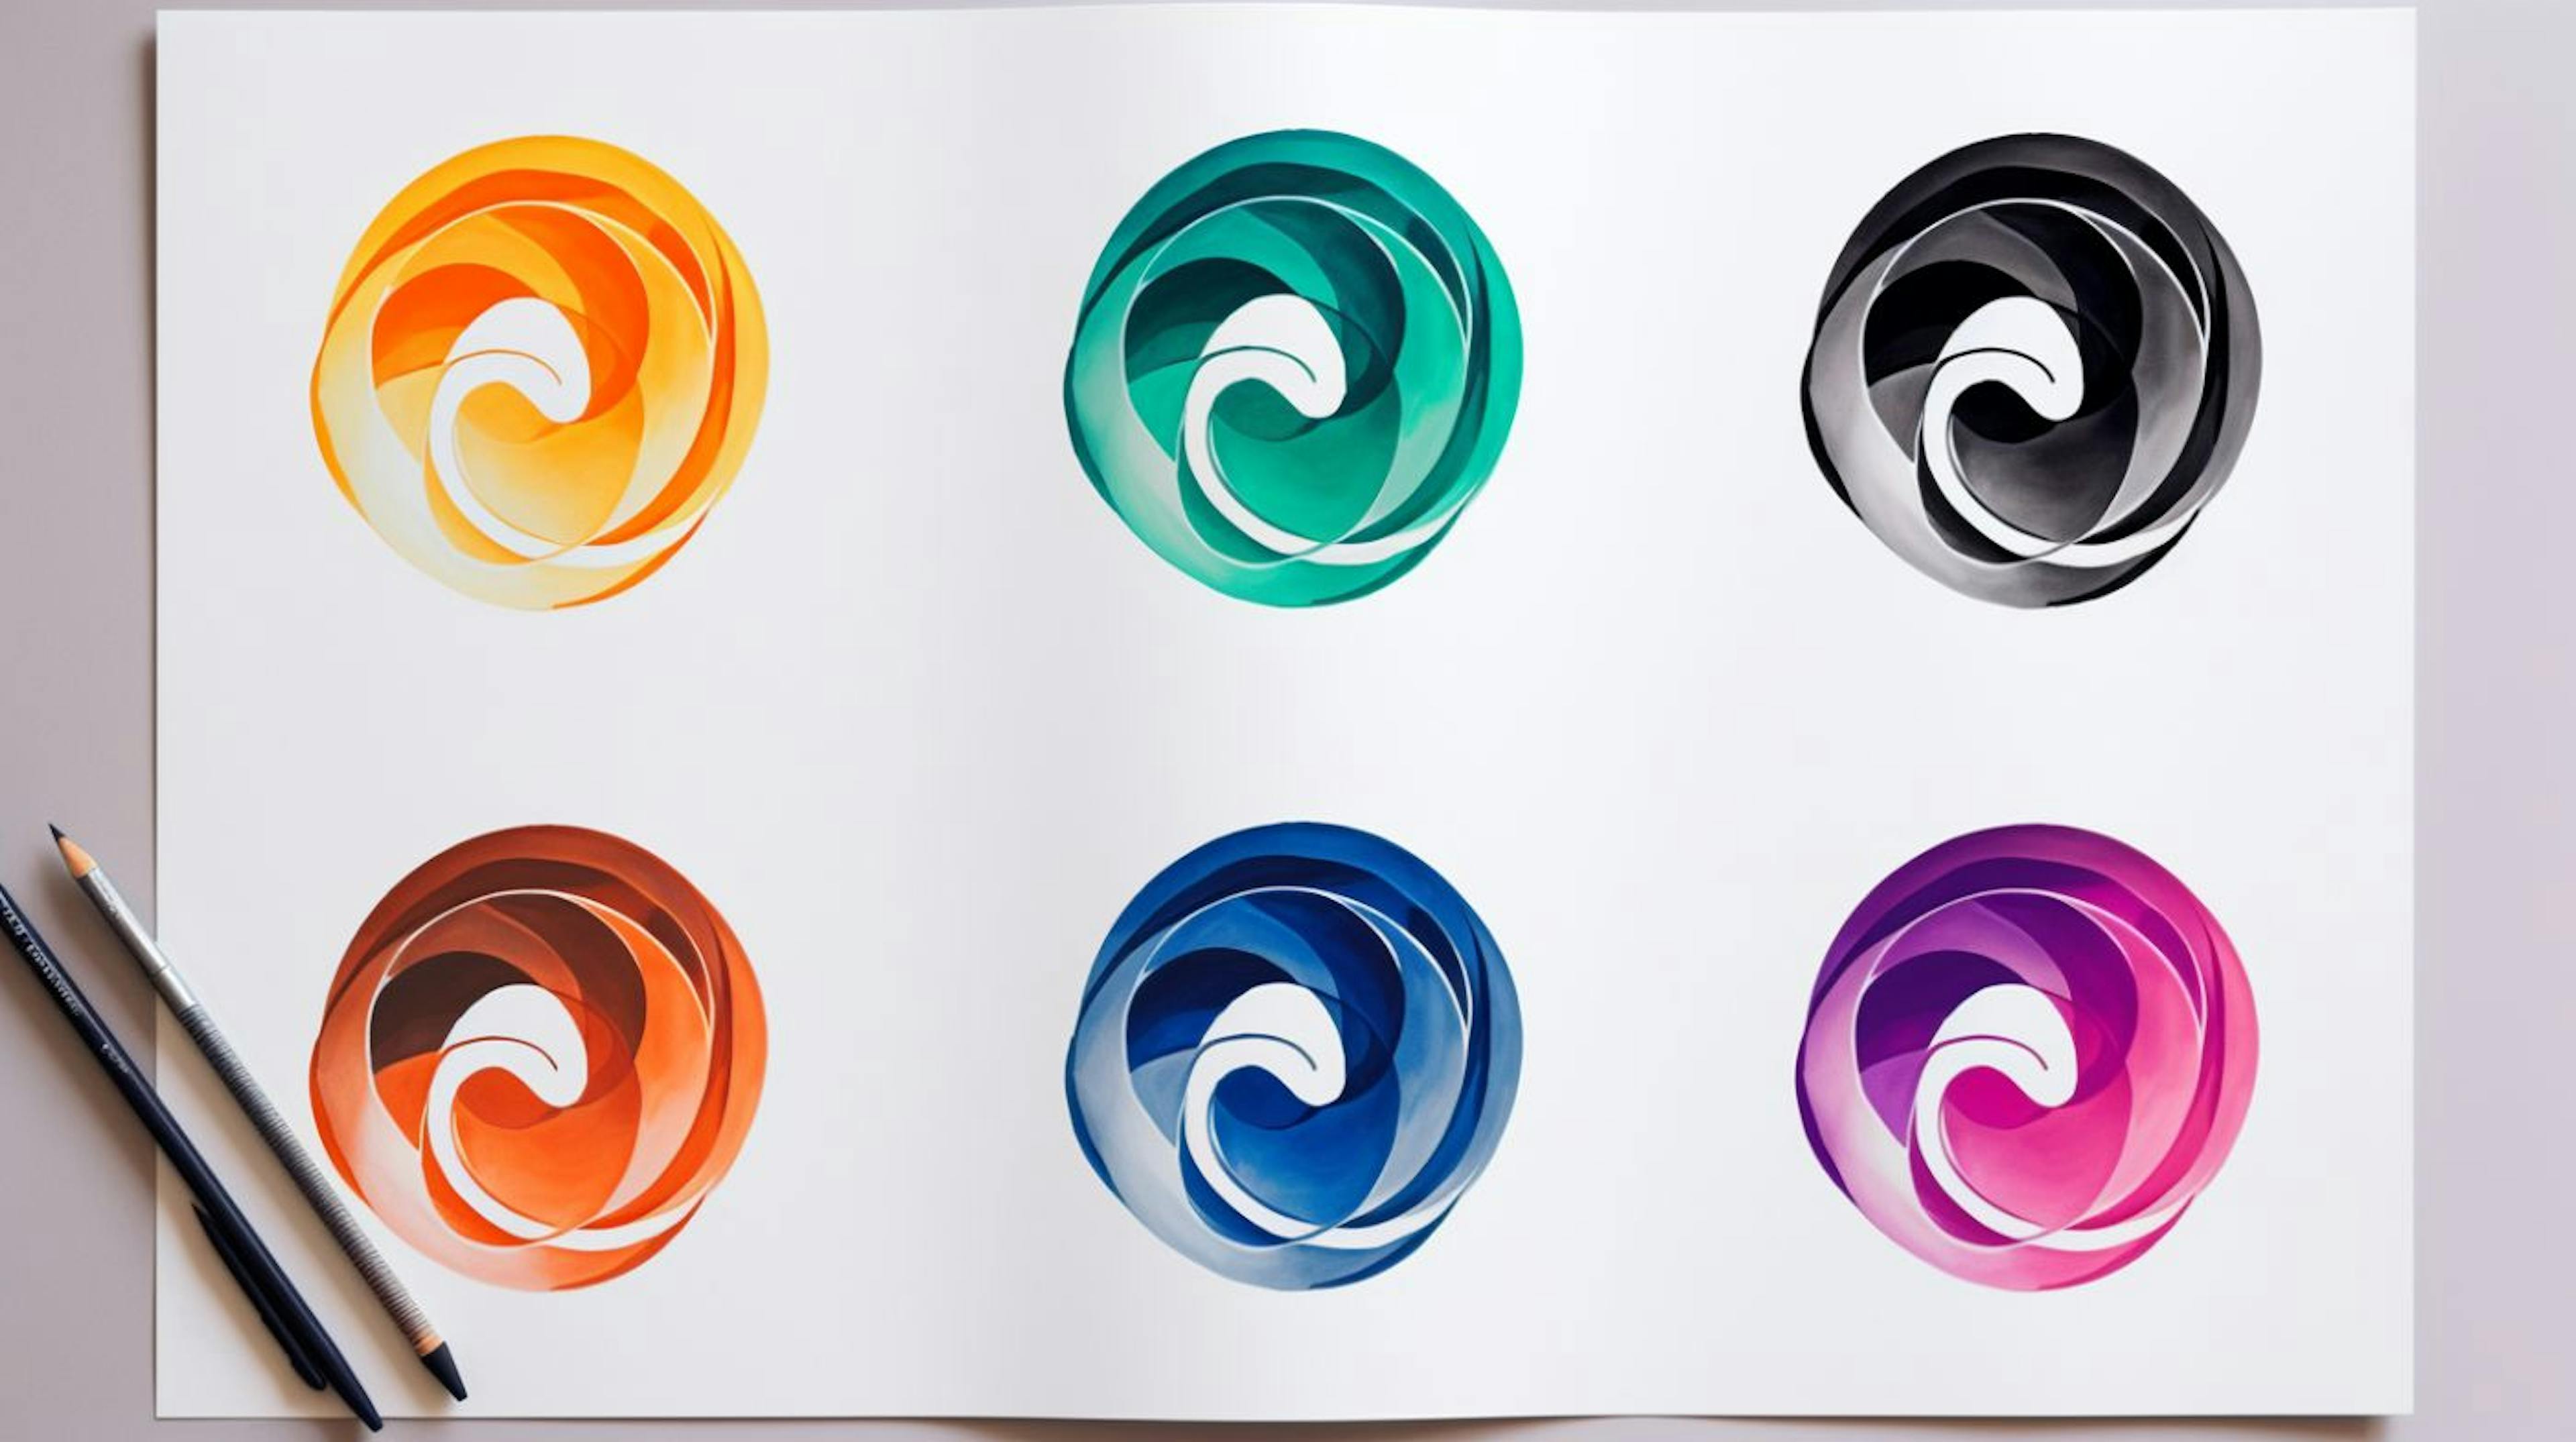 Color variations in logos